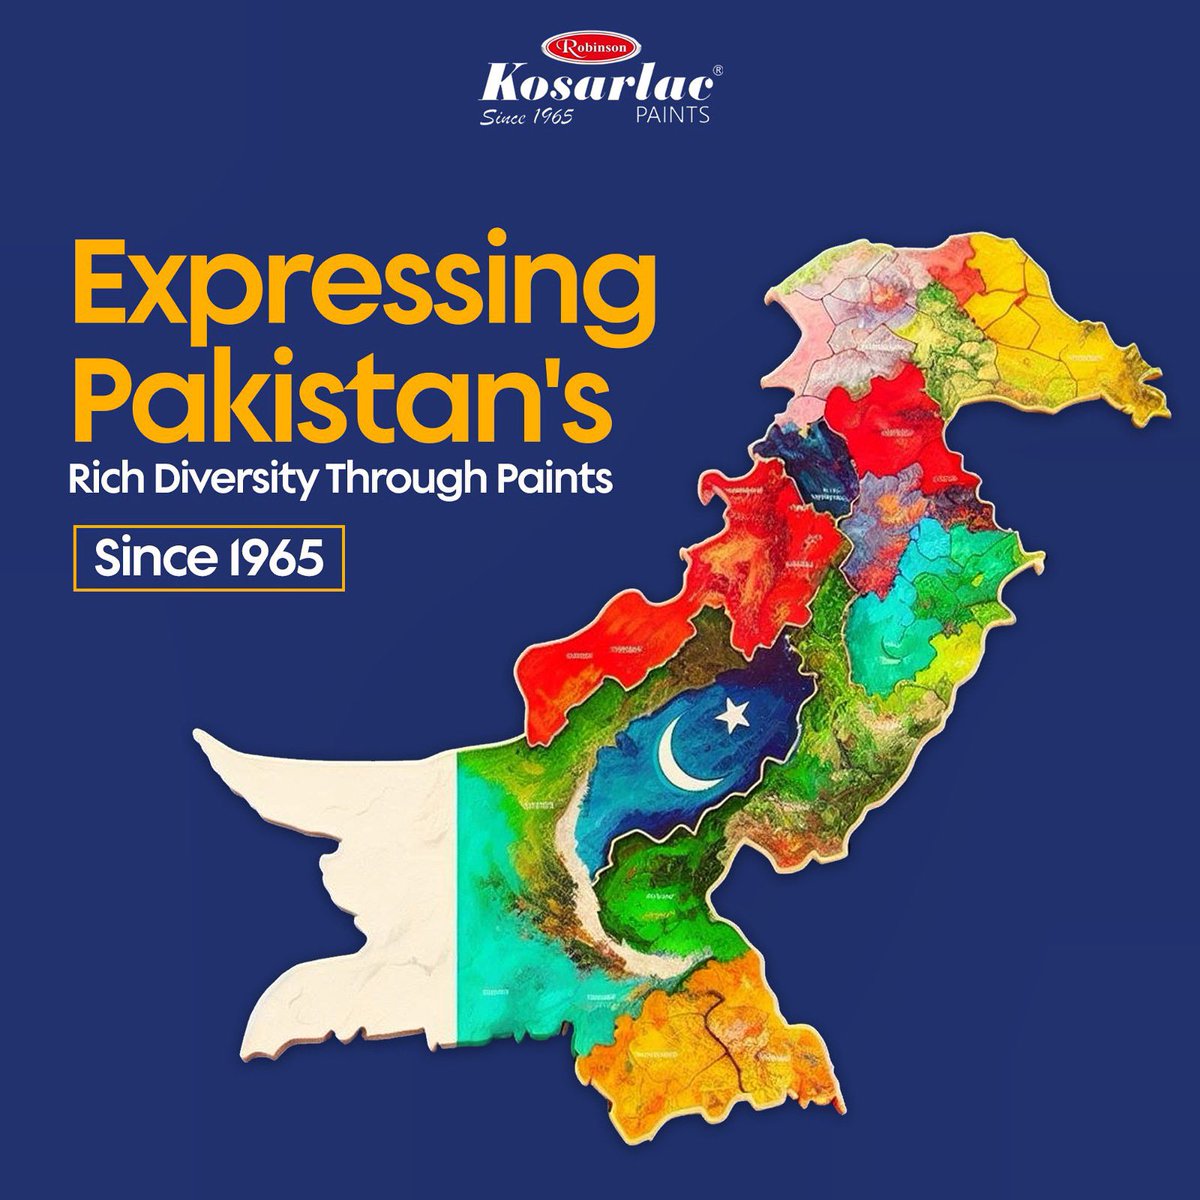 Bringing Pakistan's rich tapestry of diversity to life through the vibrant strokes of our paints since 1965

#ColorsOfPakistan #PaintingDiversity #ArtisticLegacy #CulturalMosaic #CelebratingDifferences #ExpressingHeritage #CreativeHeritage #ColorsSince1965 #PakistanInArt